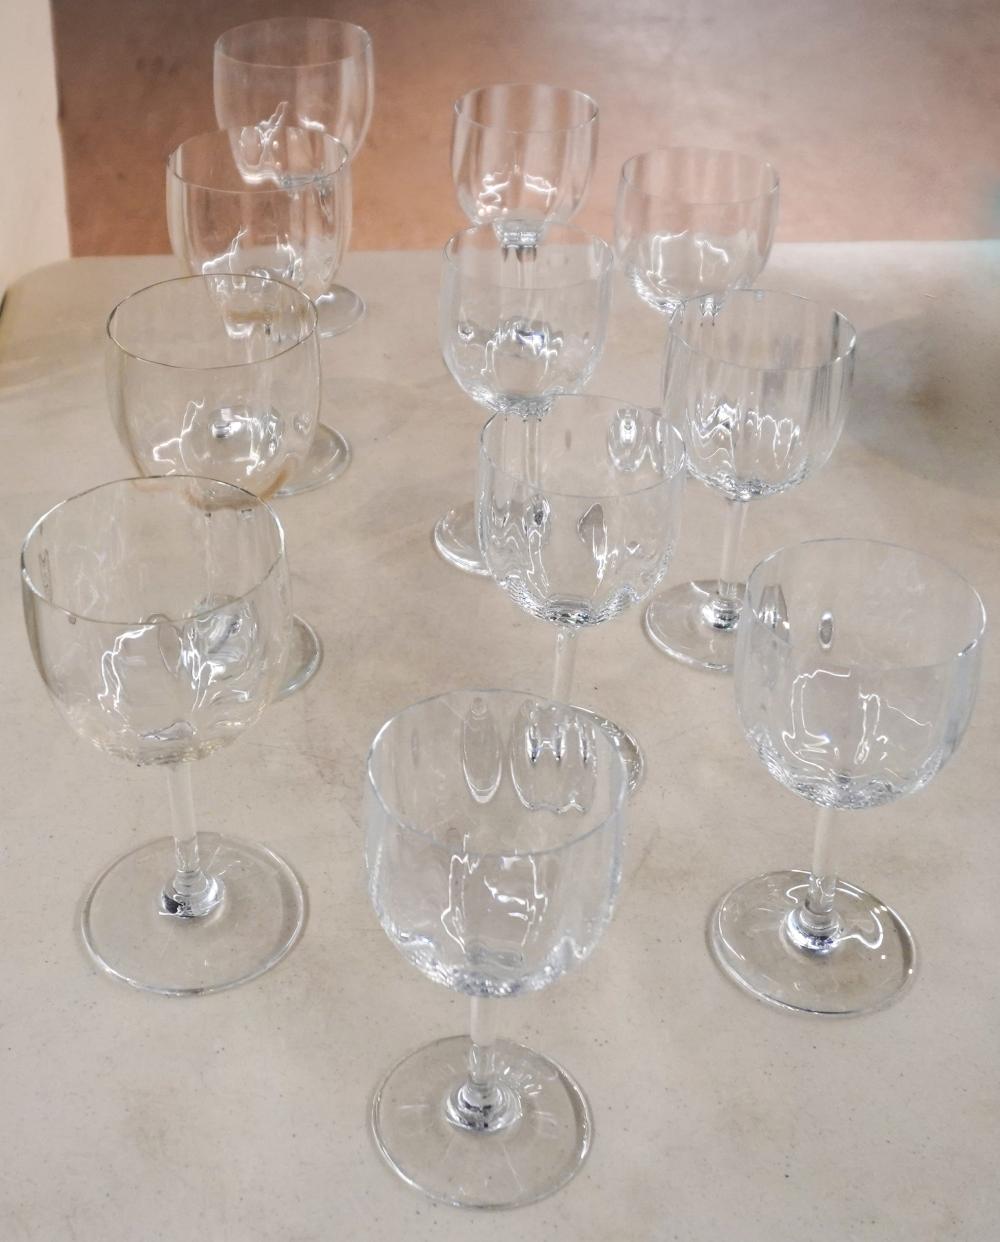 GROUP OF 11 BACCARAT CRYSTAL STEMS 2e7283